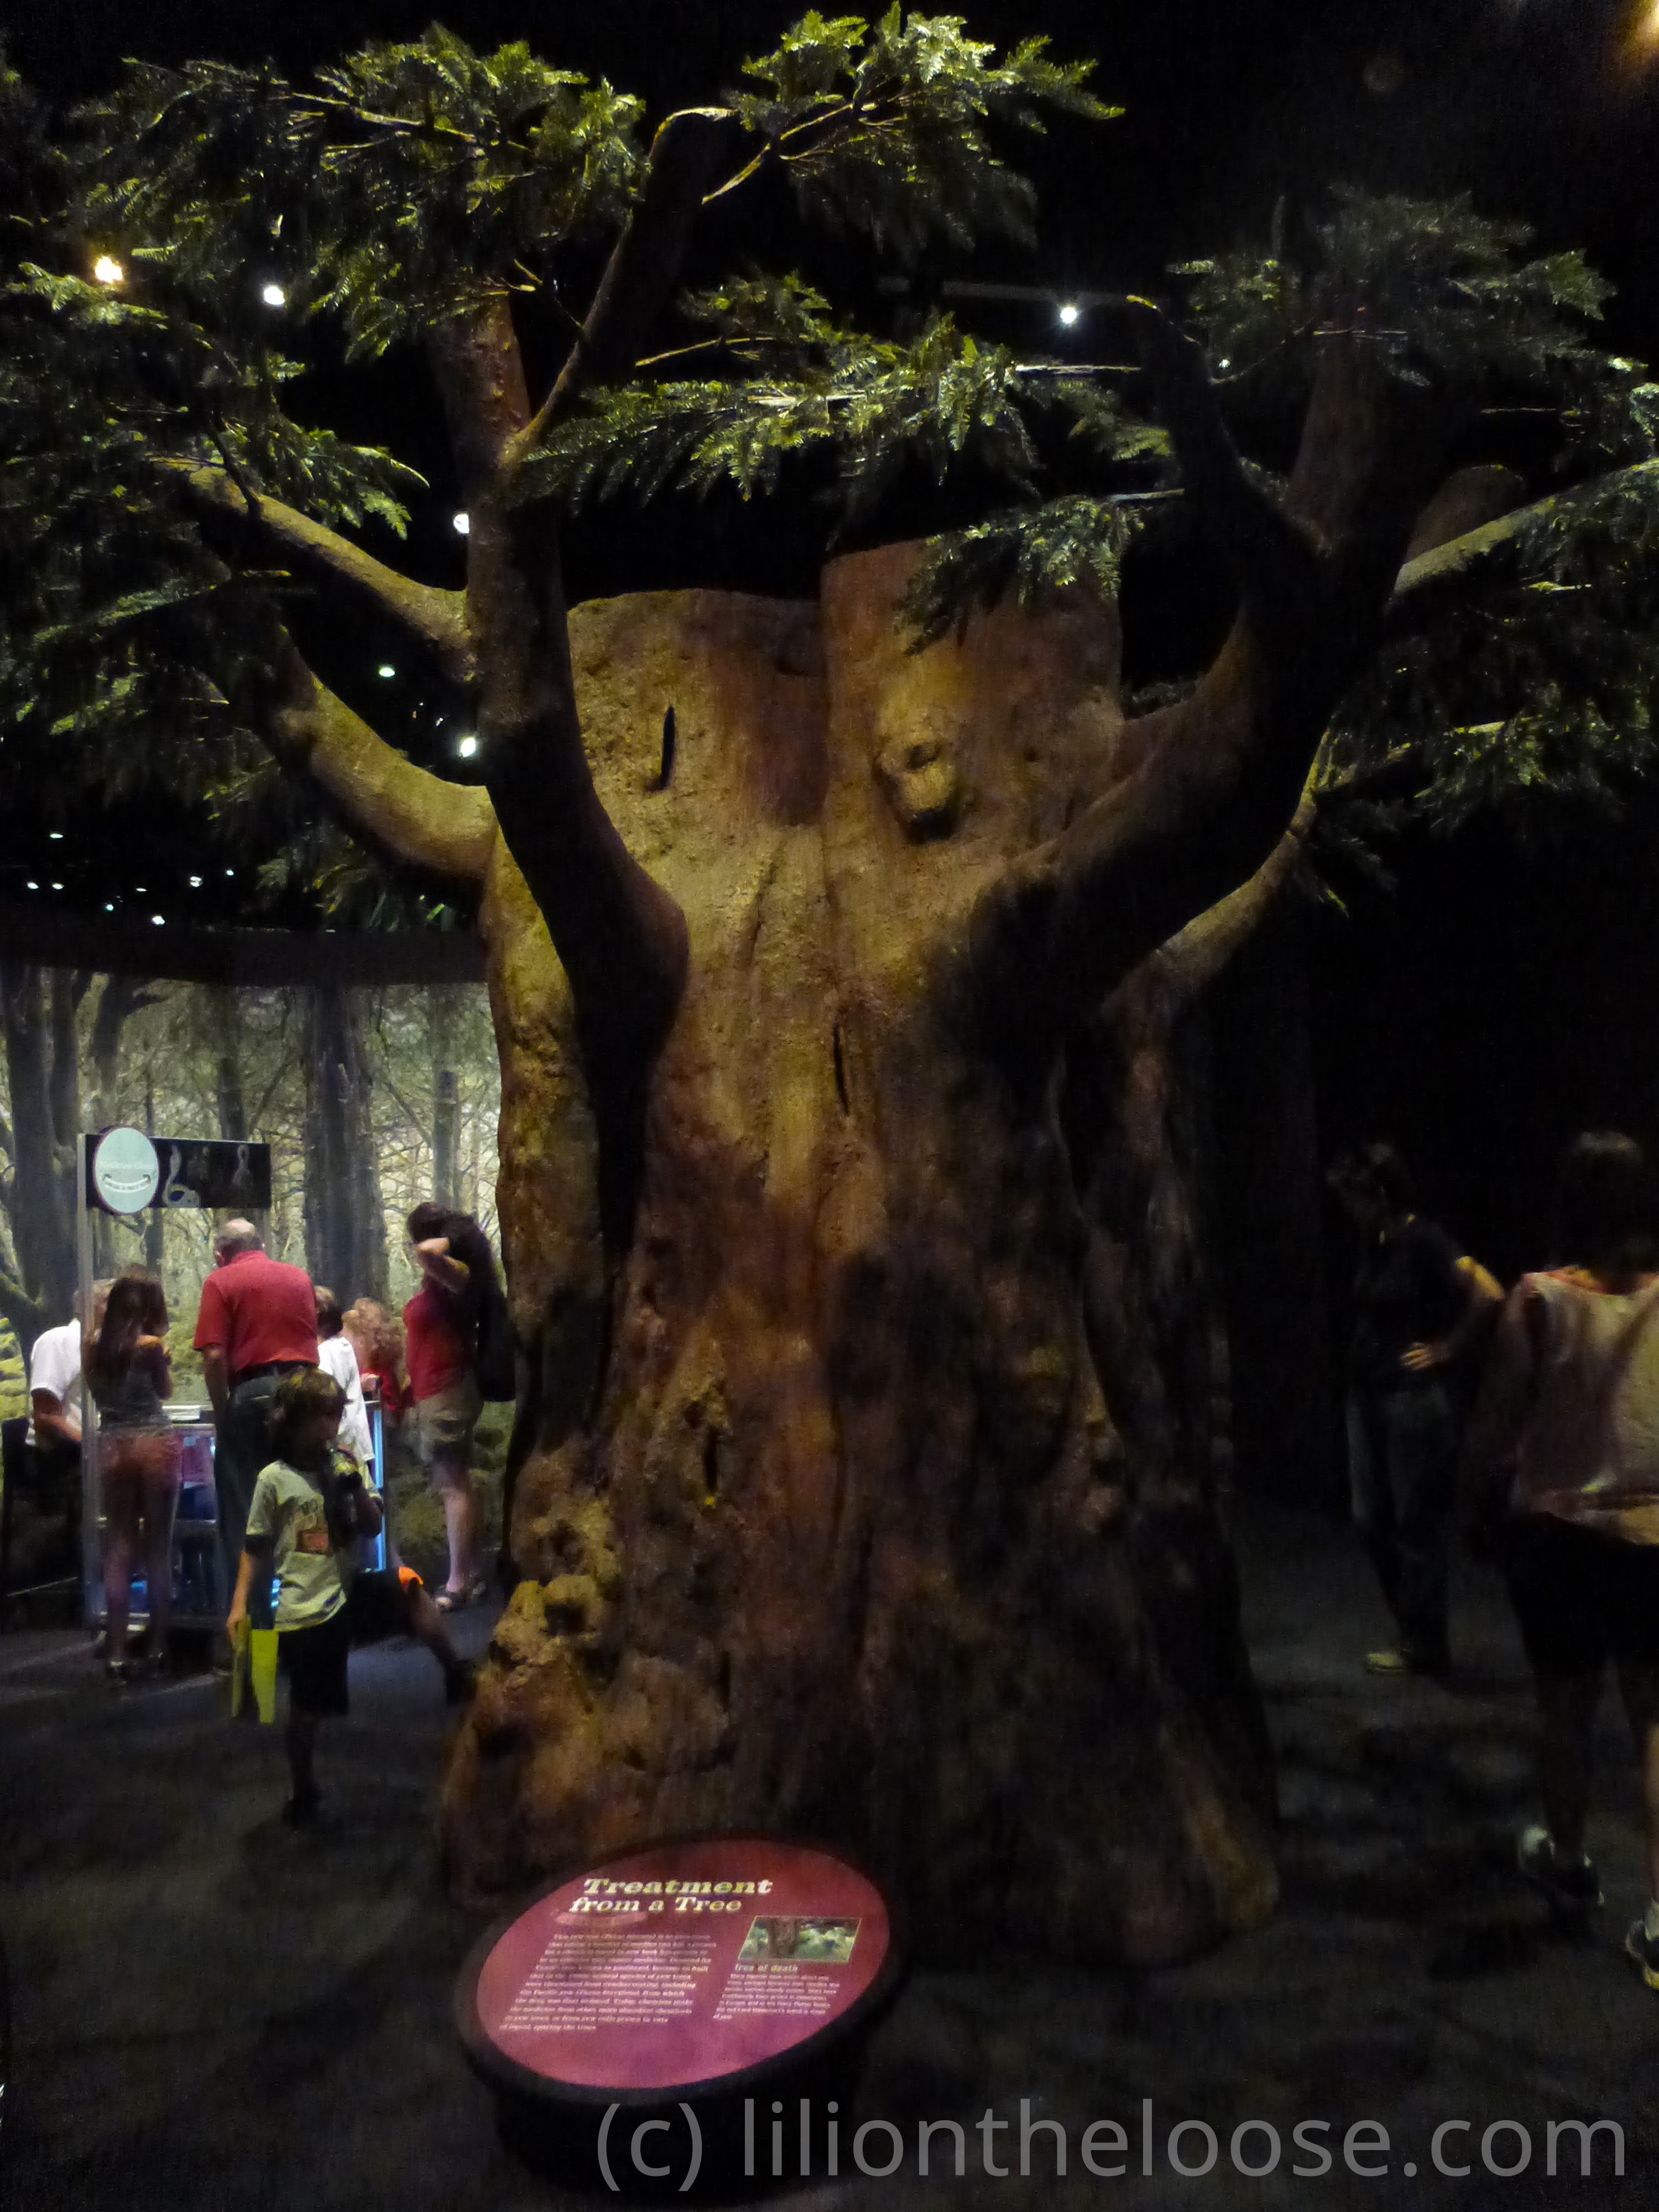 A massive tree, who's poison can be used for medical purposes.